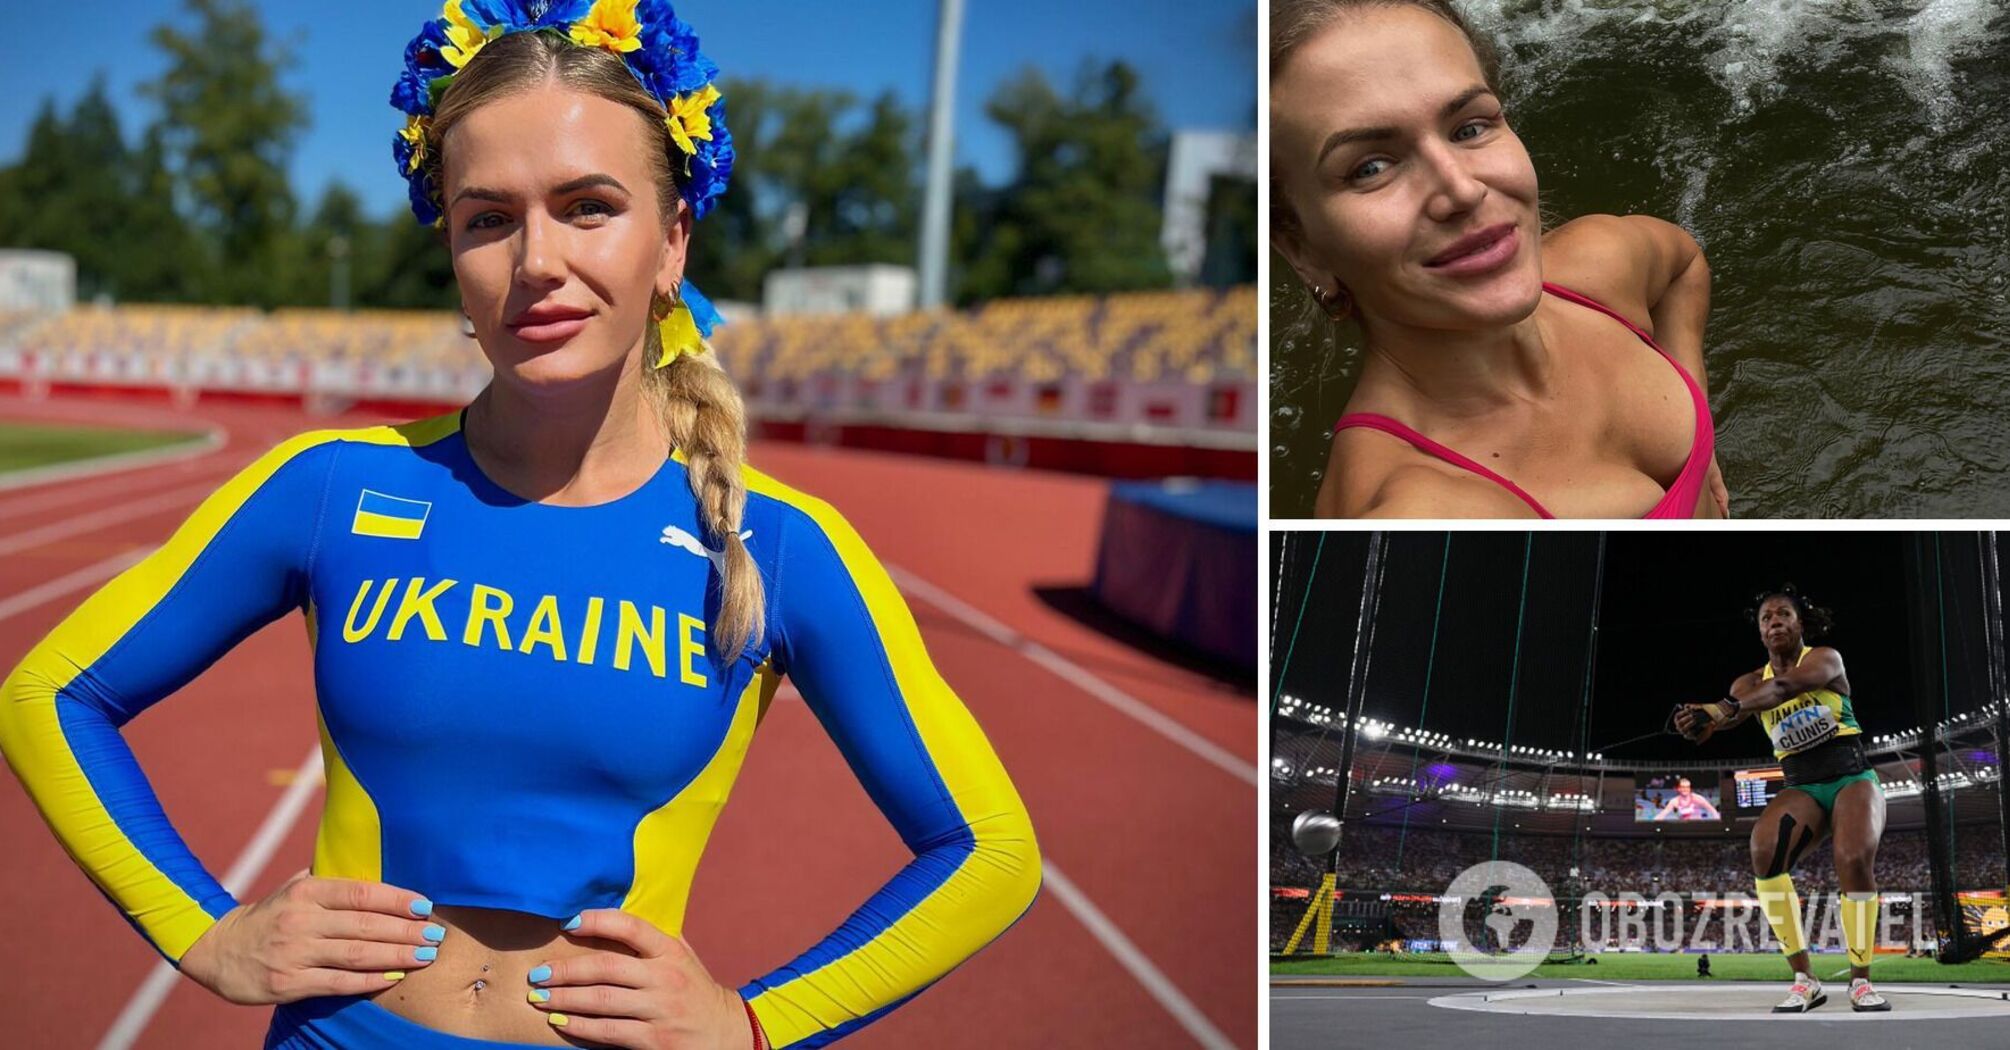 The champion athlete is not going to the Olympics because of the hurricane. The IOC gave her place to a Ukrainian beauty